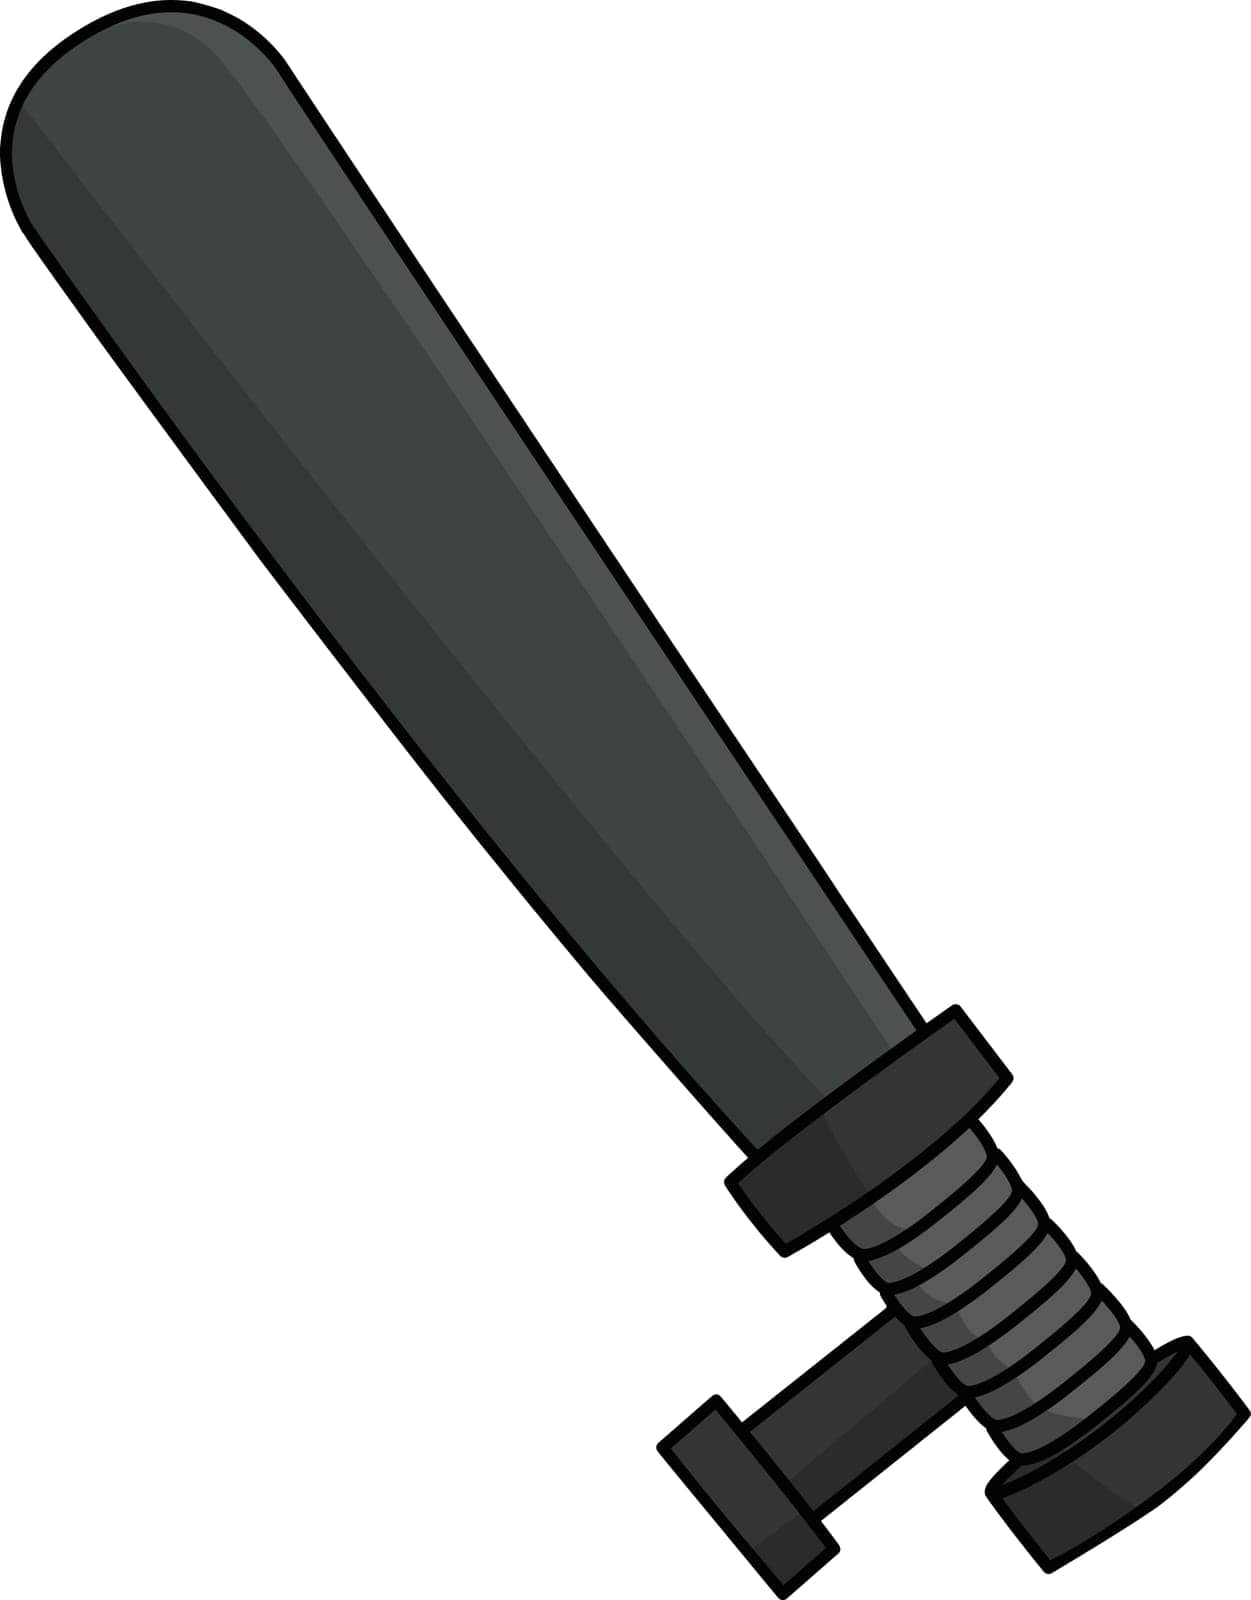 Police Baton Cartoon Colored Clipart Illustration by abbydesign